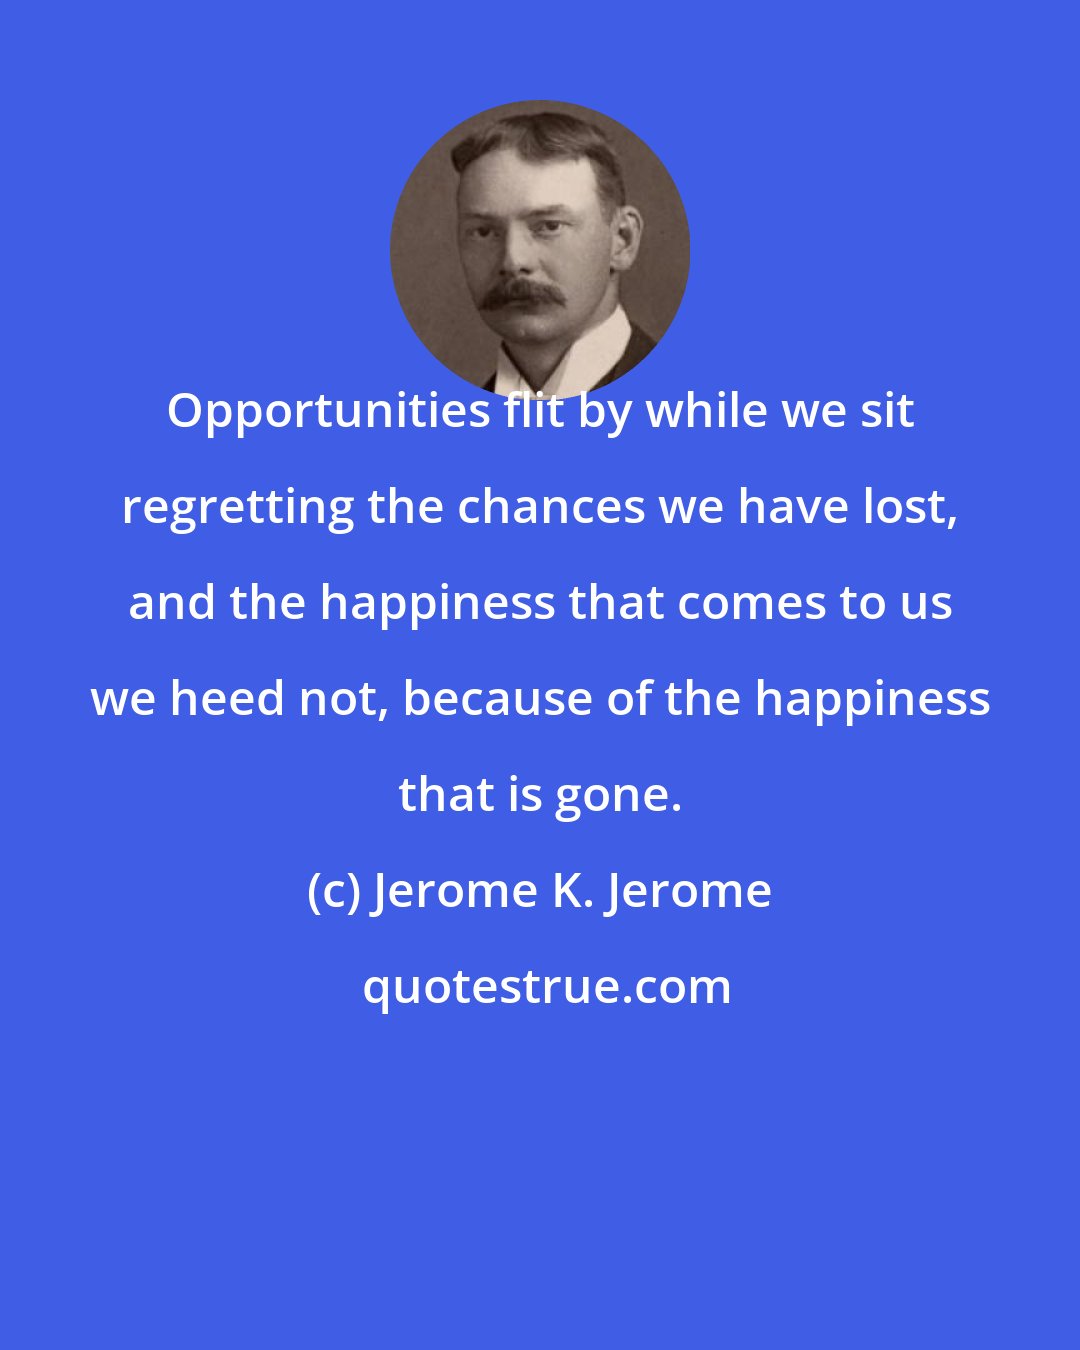 Jerome K. Jerome: Opportunities flit by while we sit regretting the chances we have lost, and the happiness that comes to us we heed not, because of the happiness that is gone.